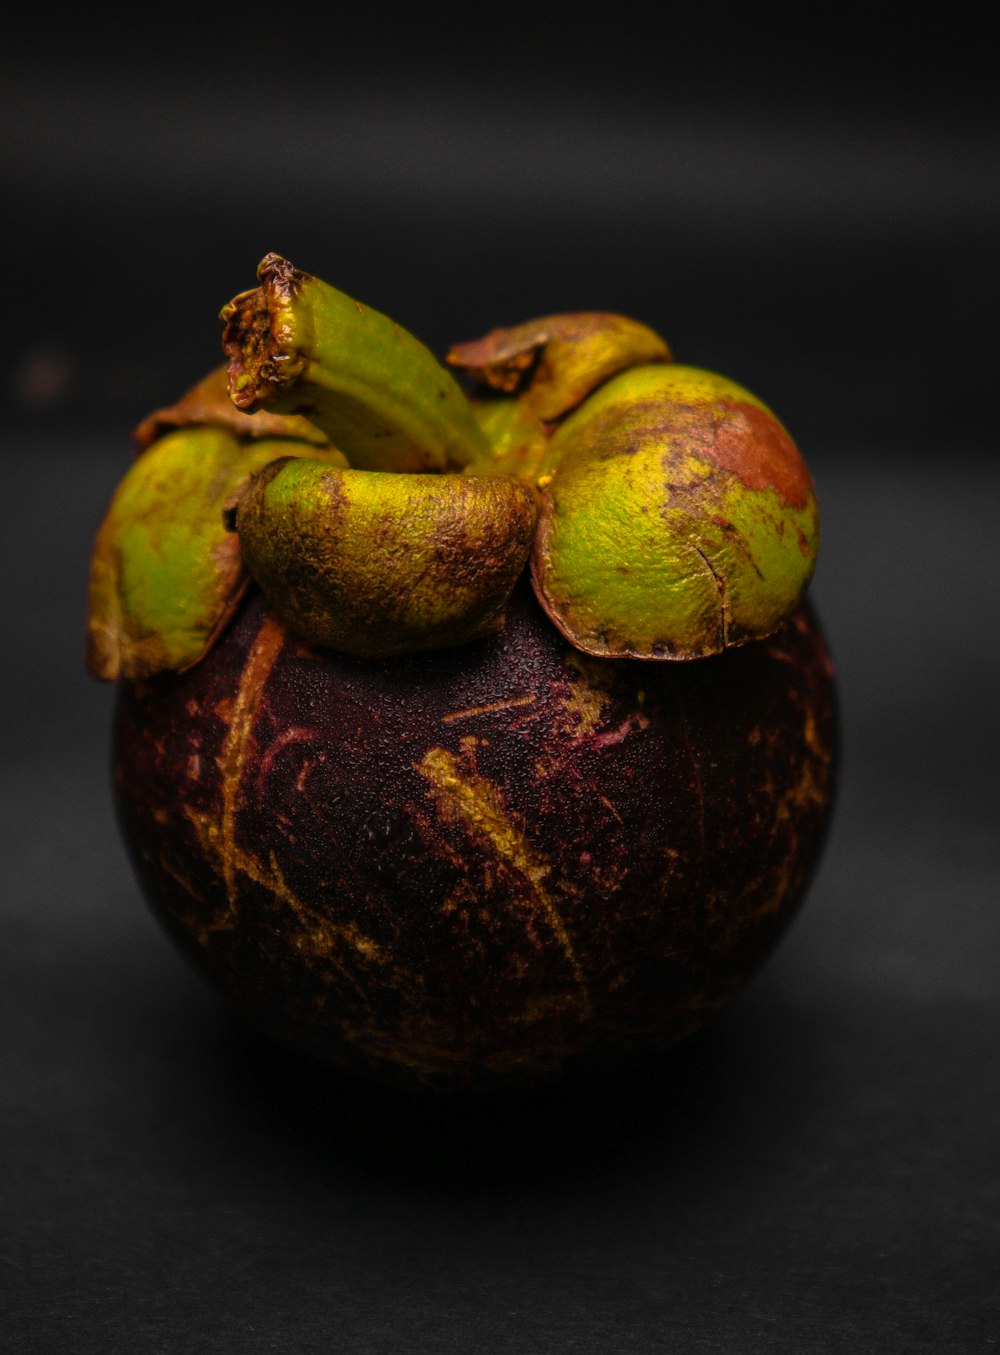 a close up of a fruit on a table